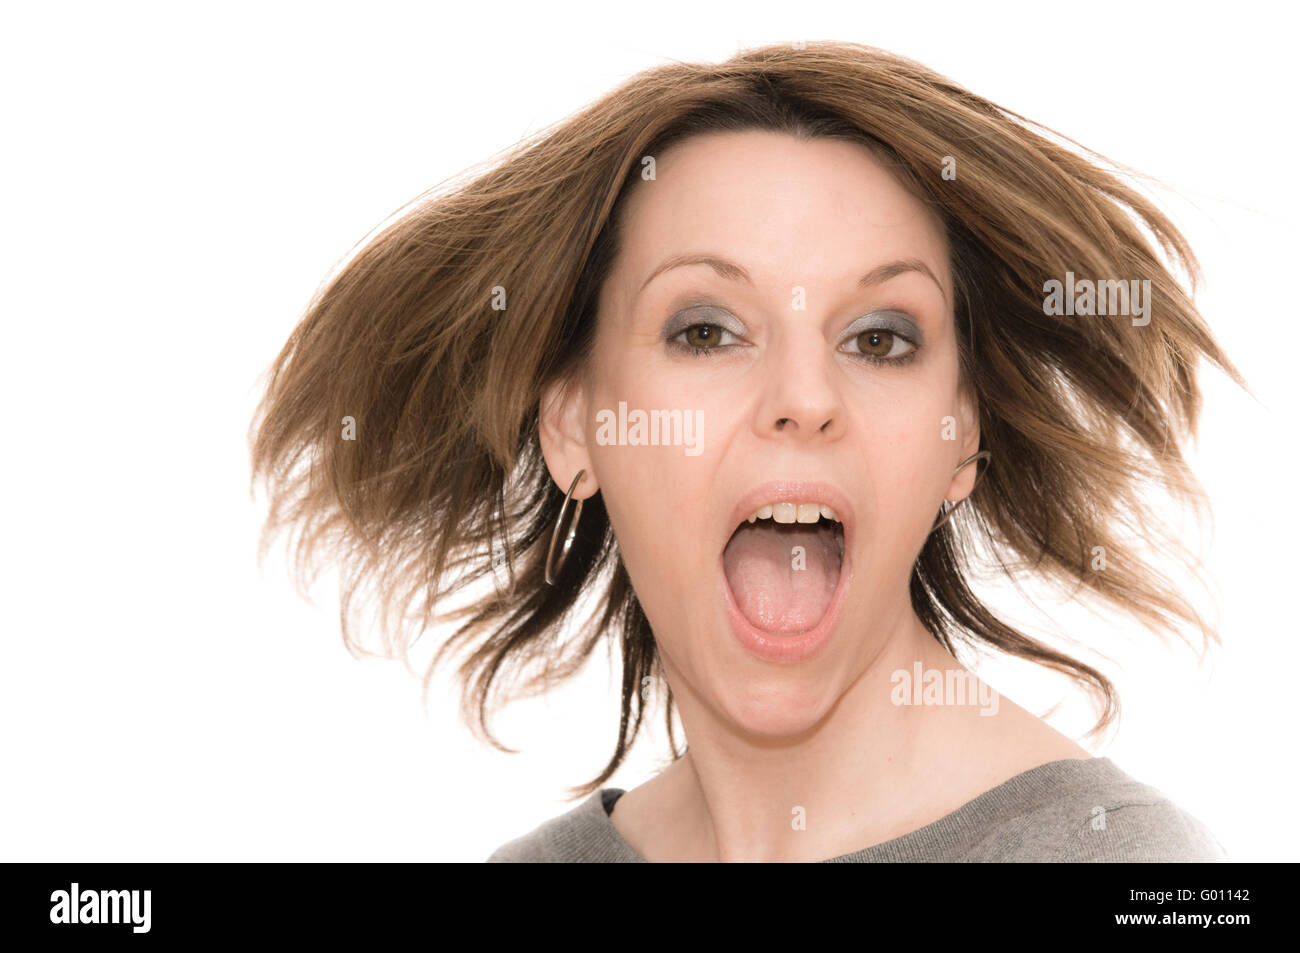 Emotions of a young woman Stock Photo